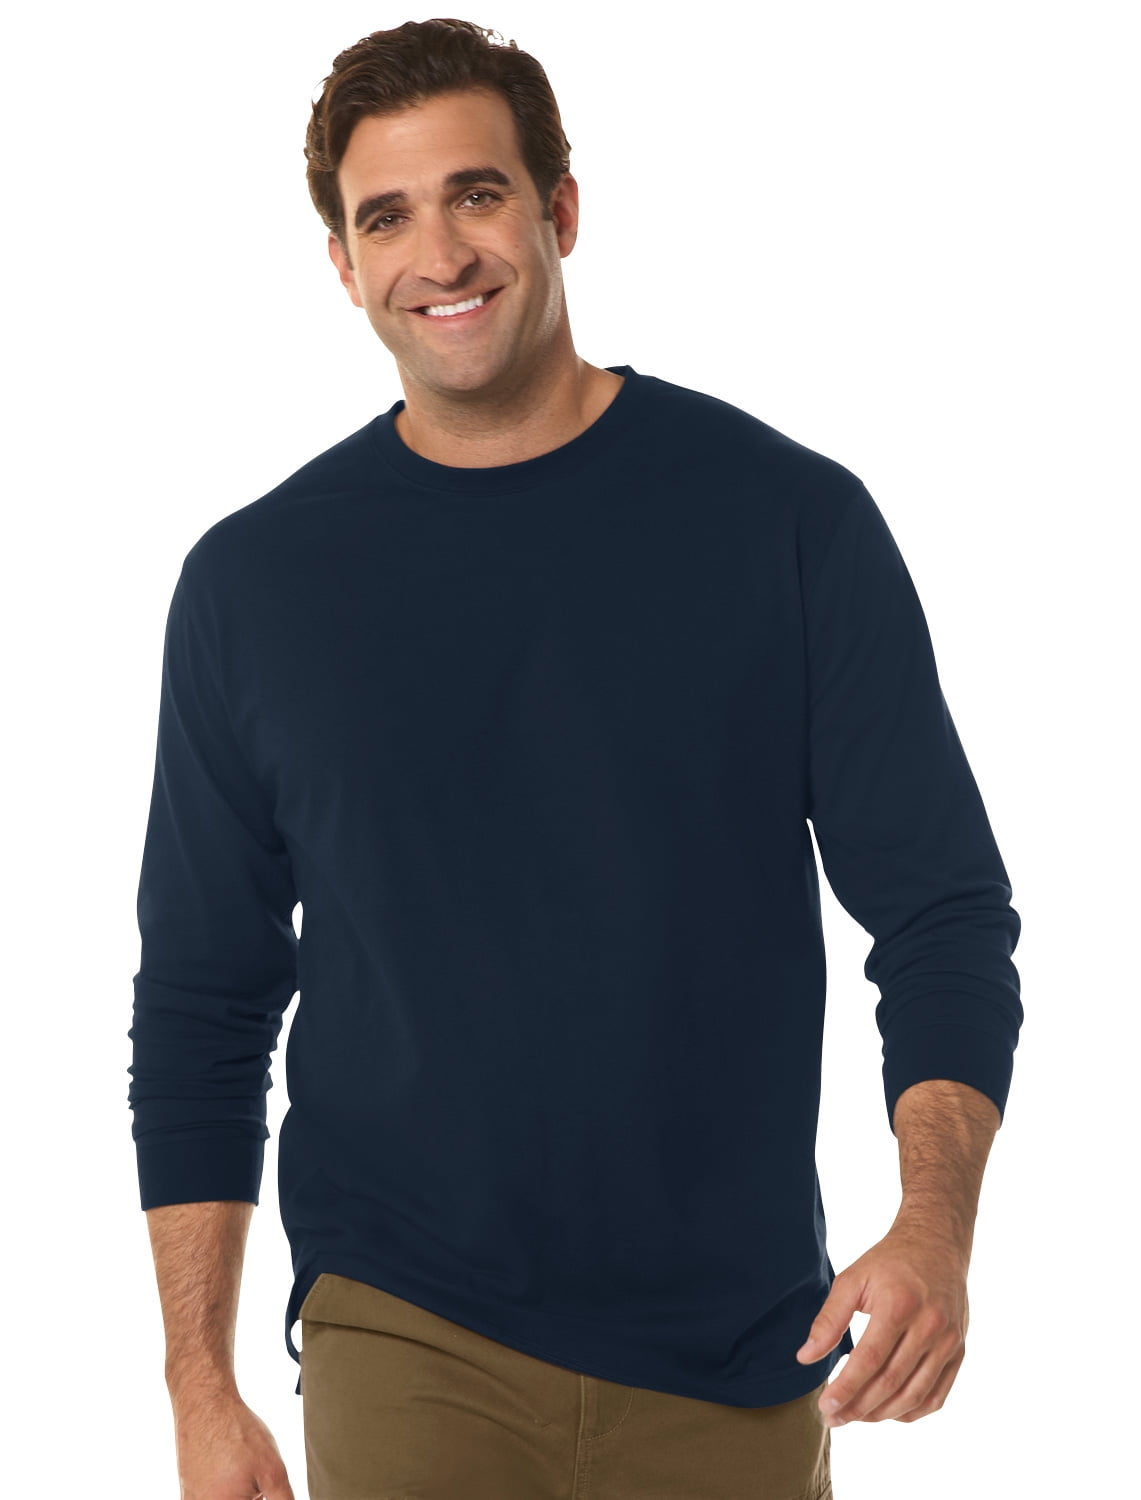 Harbor Bay by DXL Big and Tall Men's Wicking No-Pocket Long-Sleeve Tee ...